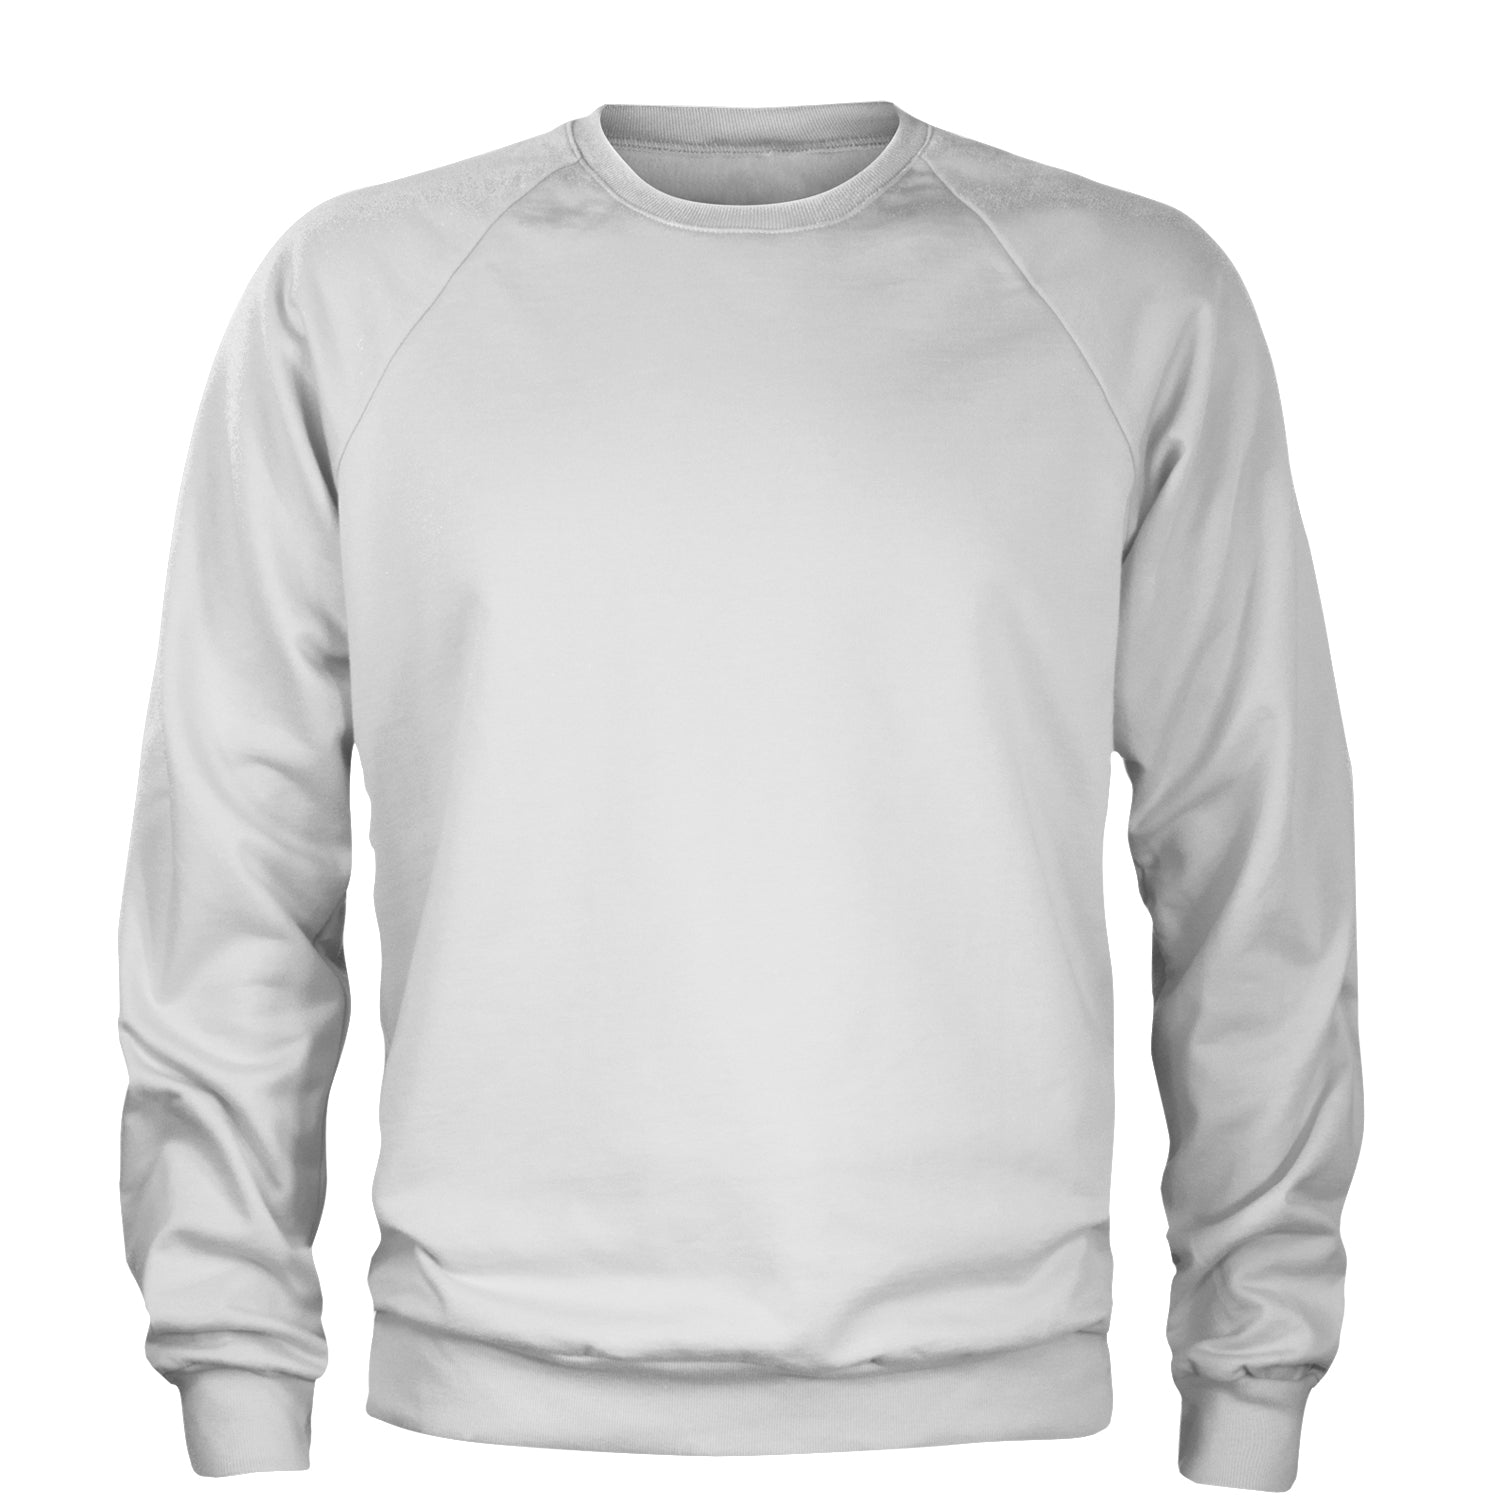 Custom Crewneck Sweatshirts For Adults & Kids create your own, custom, CustomClothing, customized, personalized by Expression Tees